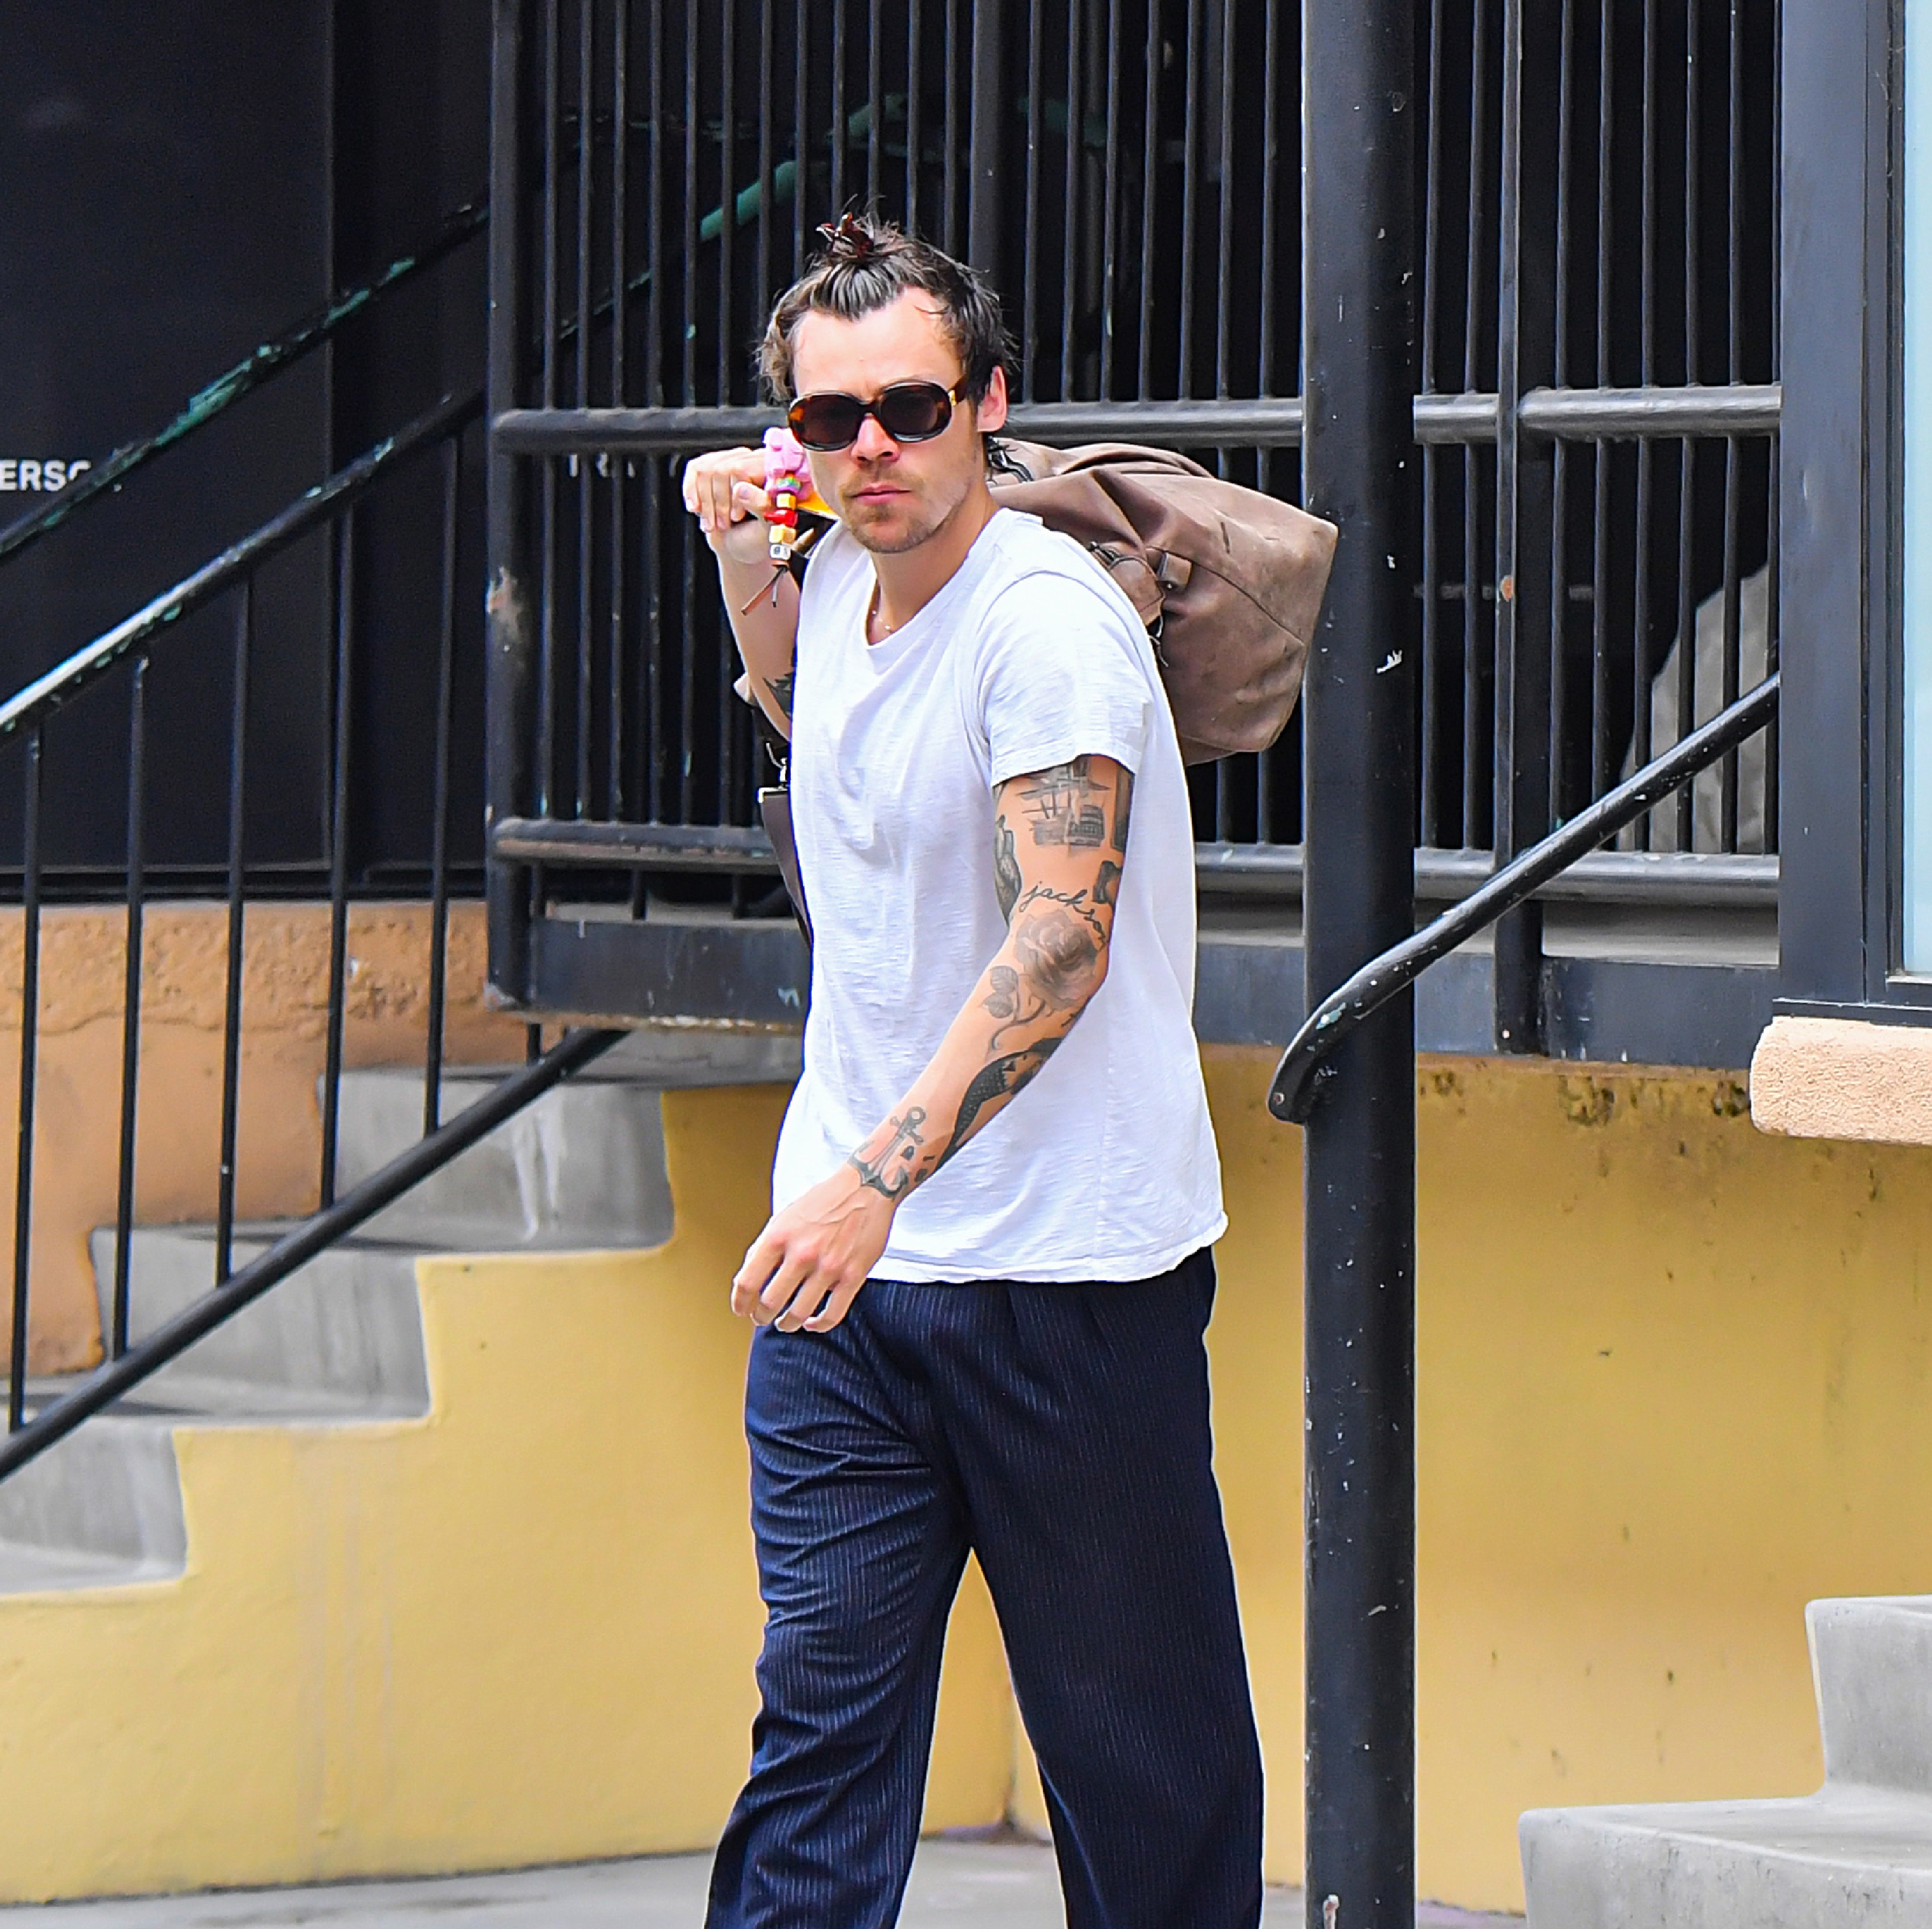 Olivia Wilde Spotted in New York City Ahead of Harry Styles' Next Madison  Square Garden Show: Photo 4645473, Olivia Wilde Photos